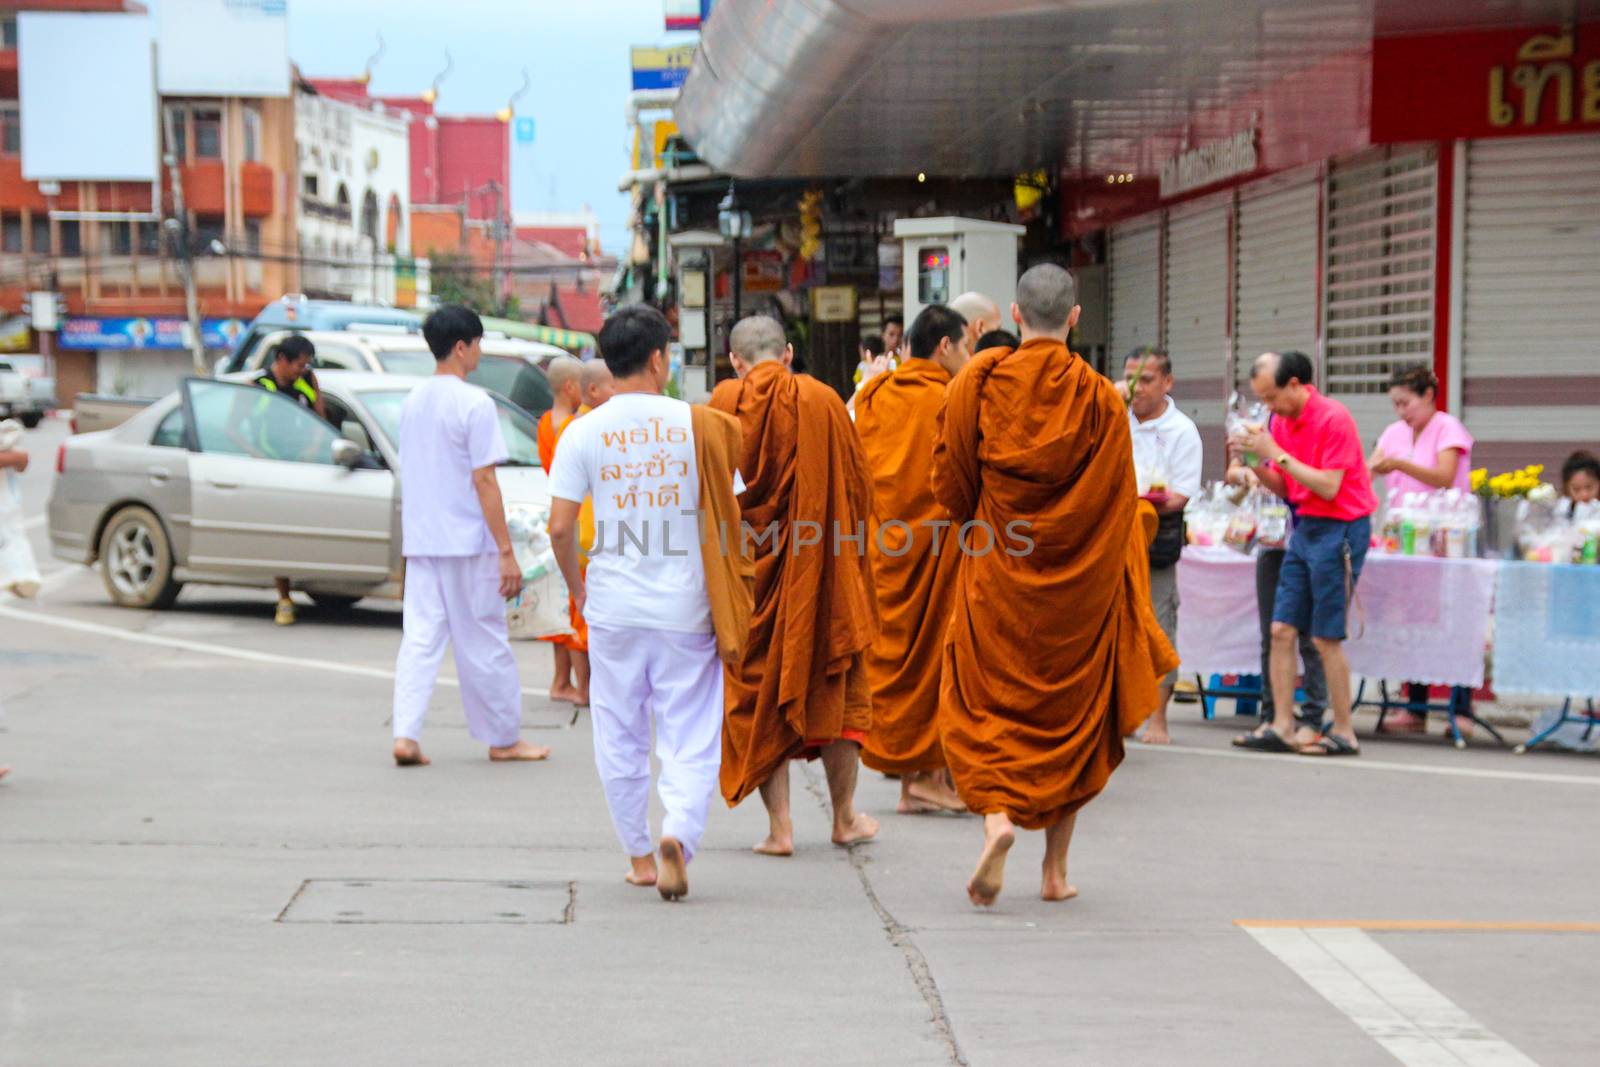 The monk walked alms in the morning. by suthipong